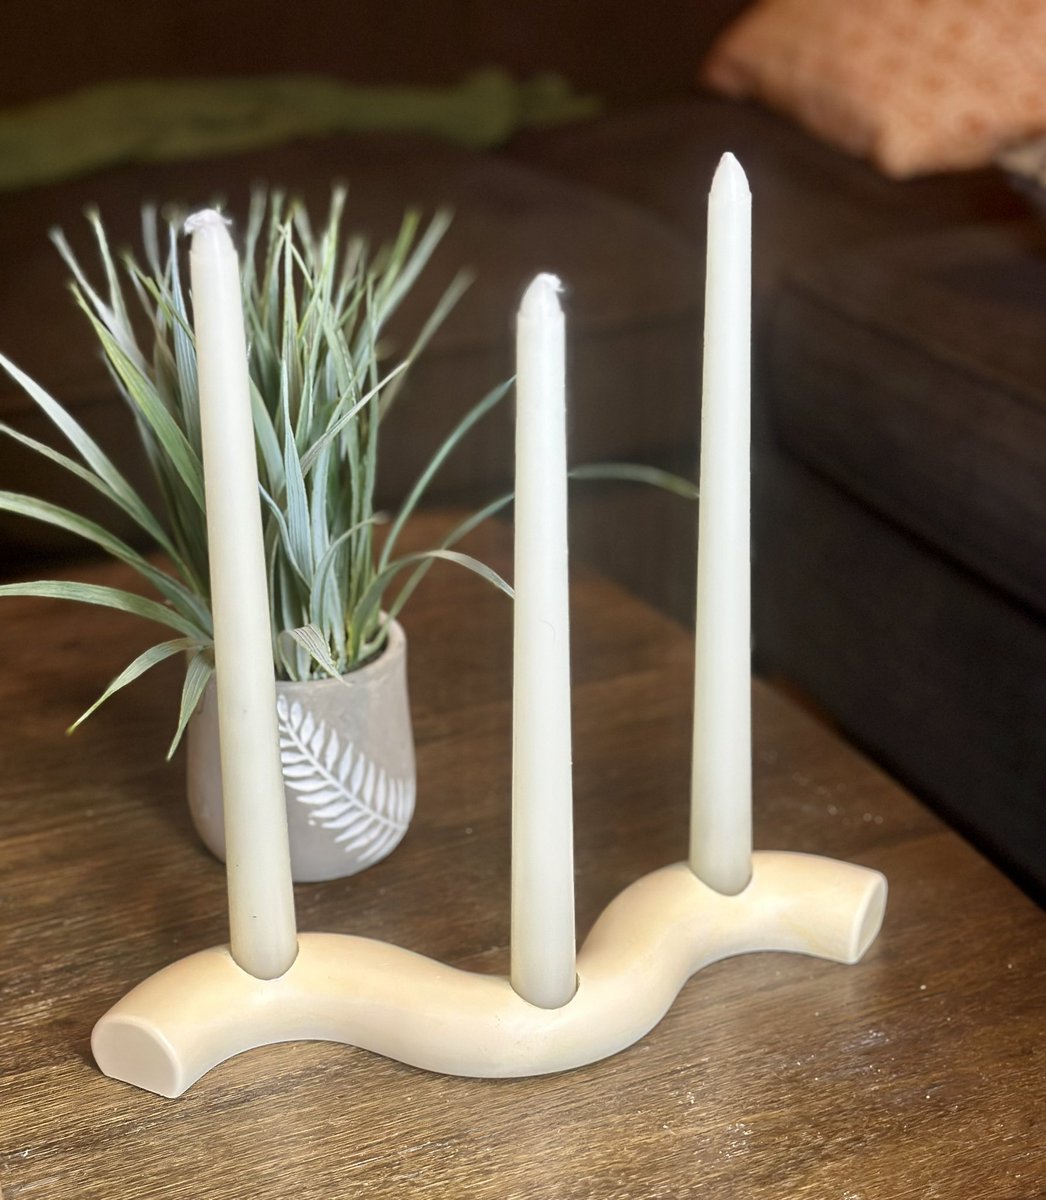 wavy candle holder 🕯️ 
comes with the candles! use code 'SummerSale' to get 30% off !!